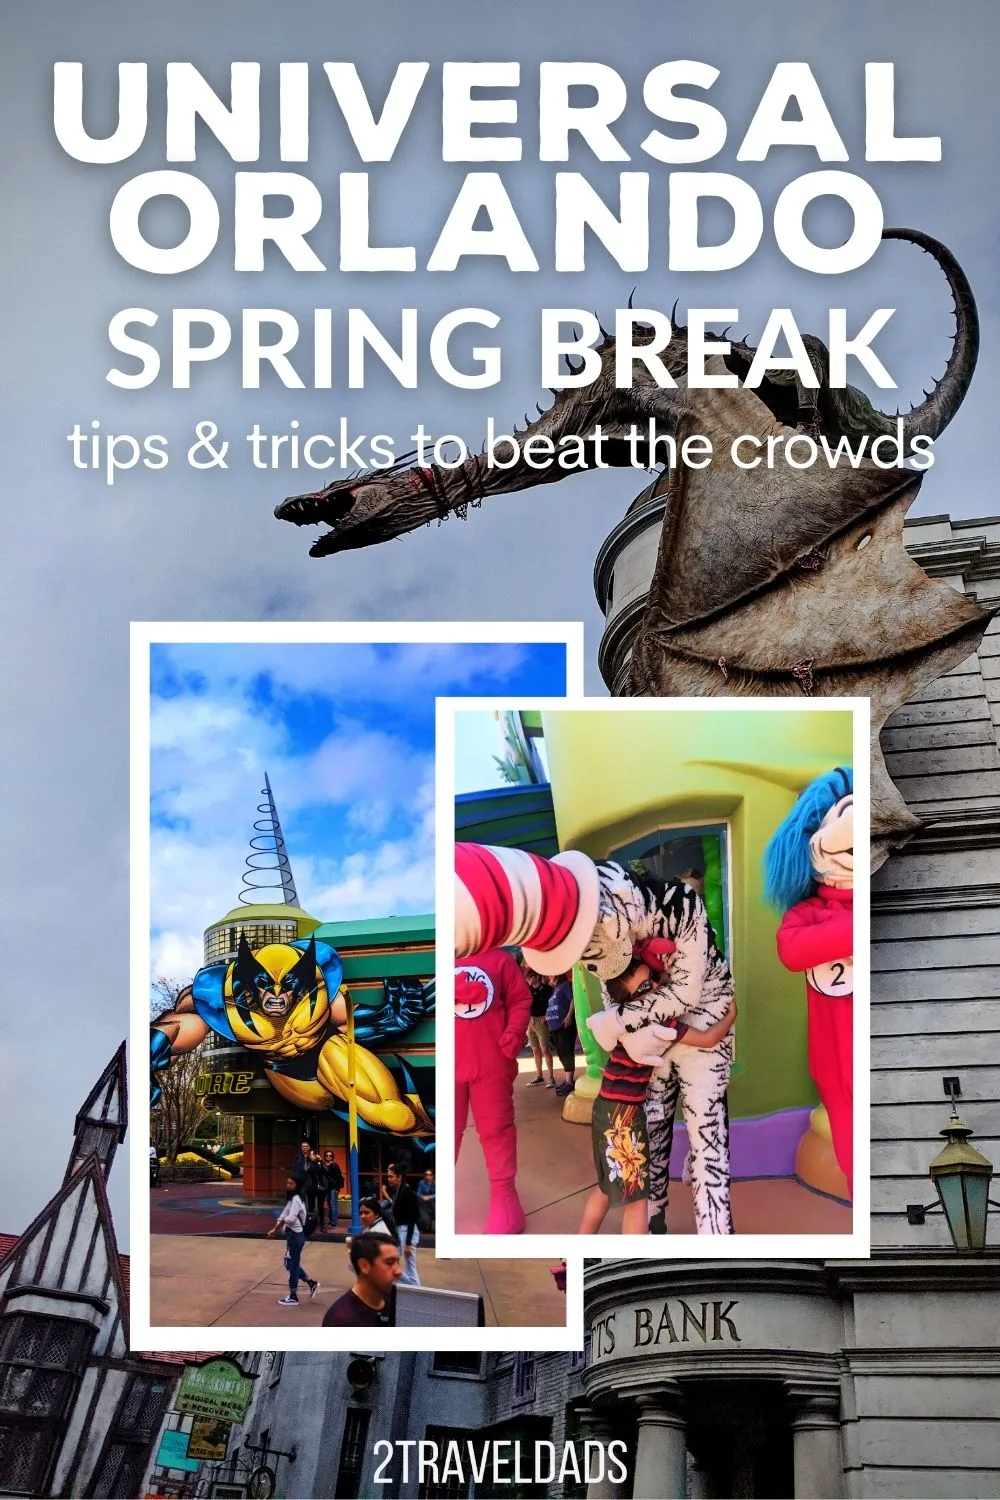 Planning a Universal Orlando spring break trip is a great idea and it isn't as crazy as it sounds. From tips for where to stay on a budget to how to make the most of your time, this guide to Universal Orlando Resort during busy season is everything you need!